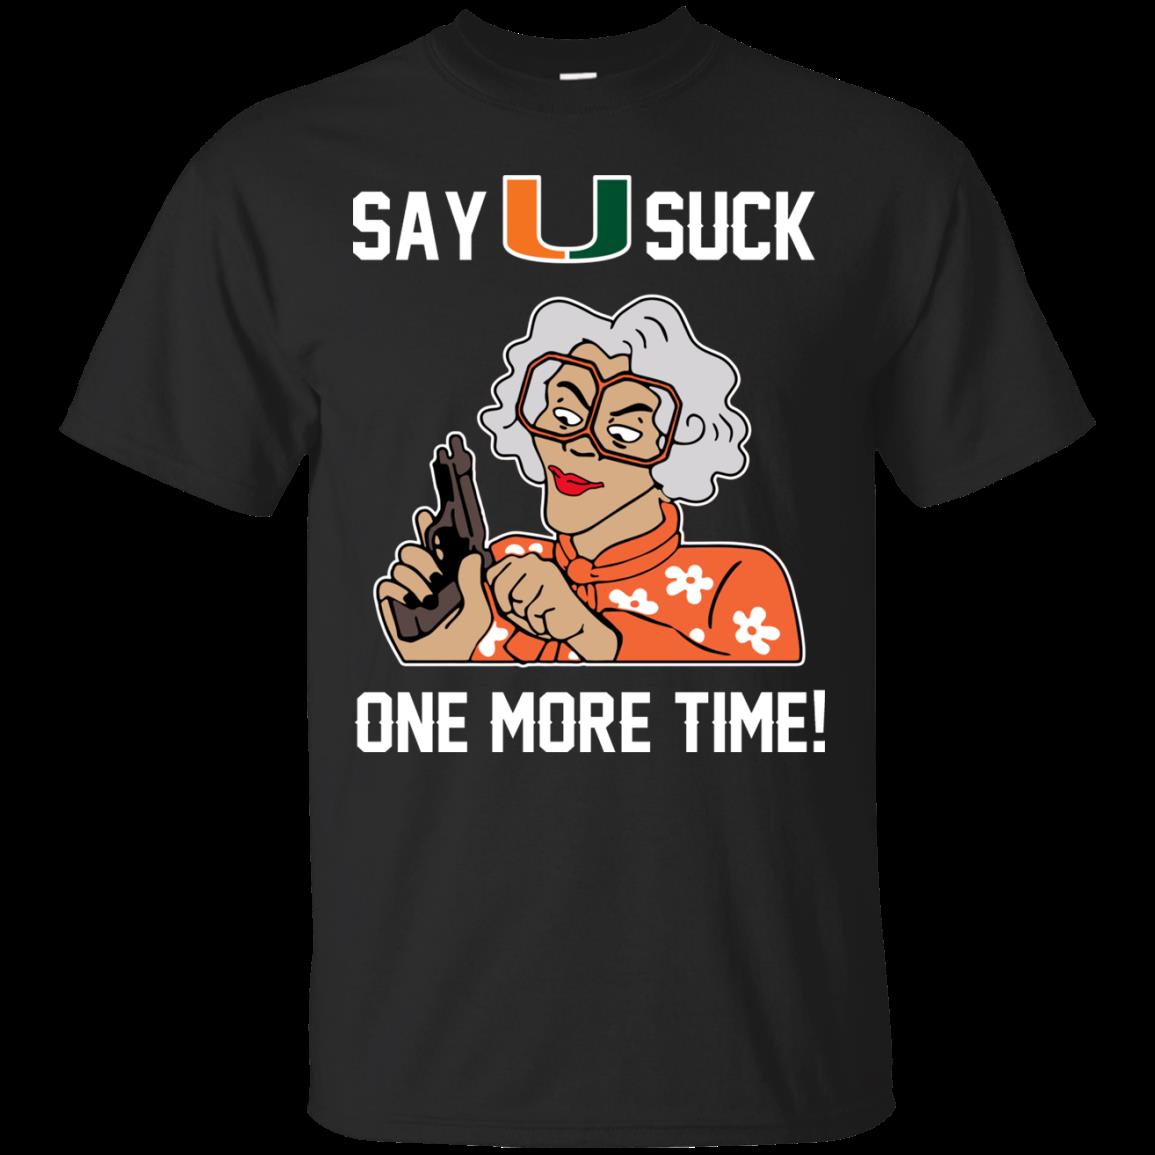 Miami Hurricanes Madea Shirts Say It Suck One More Time